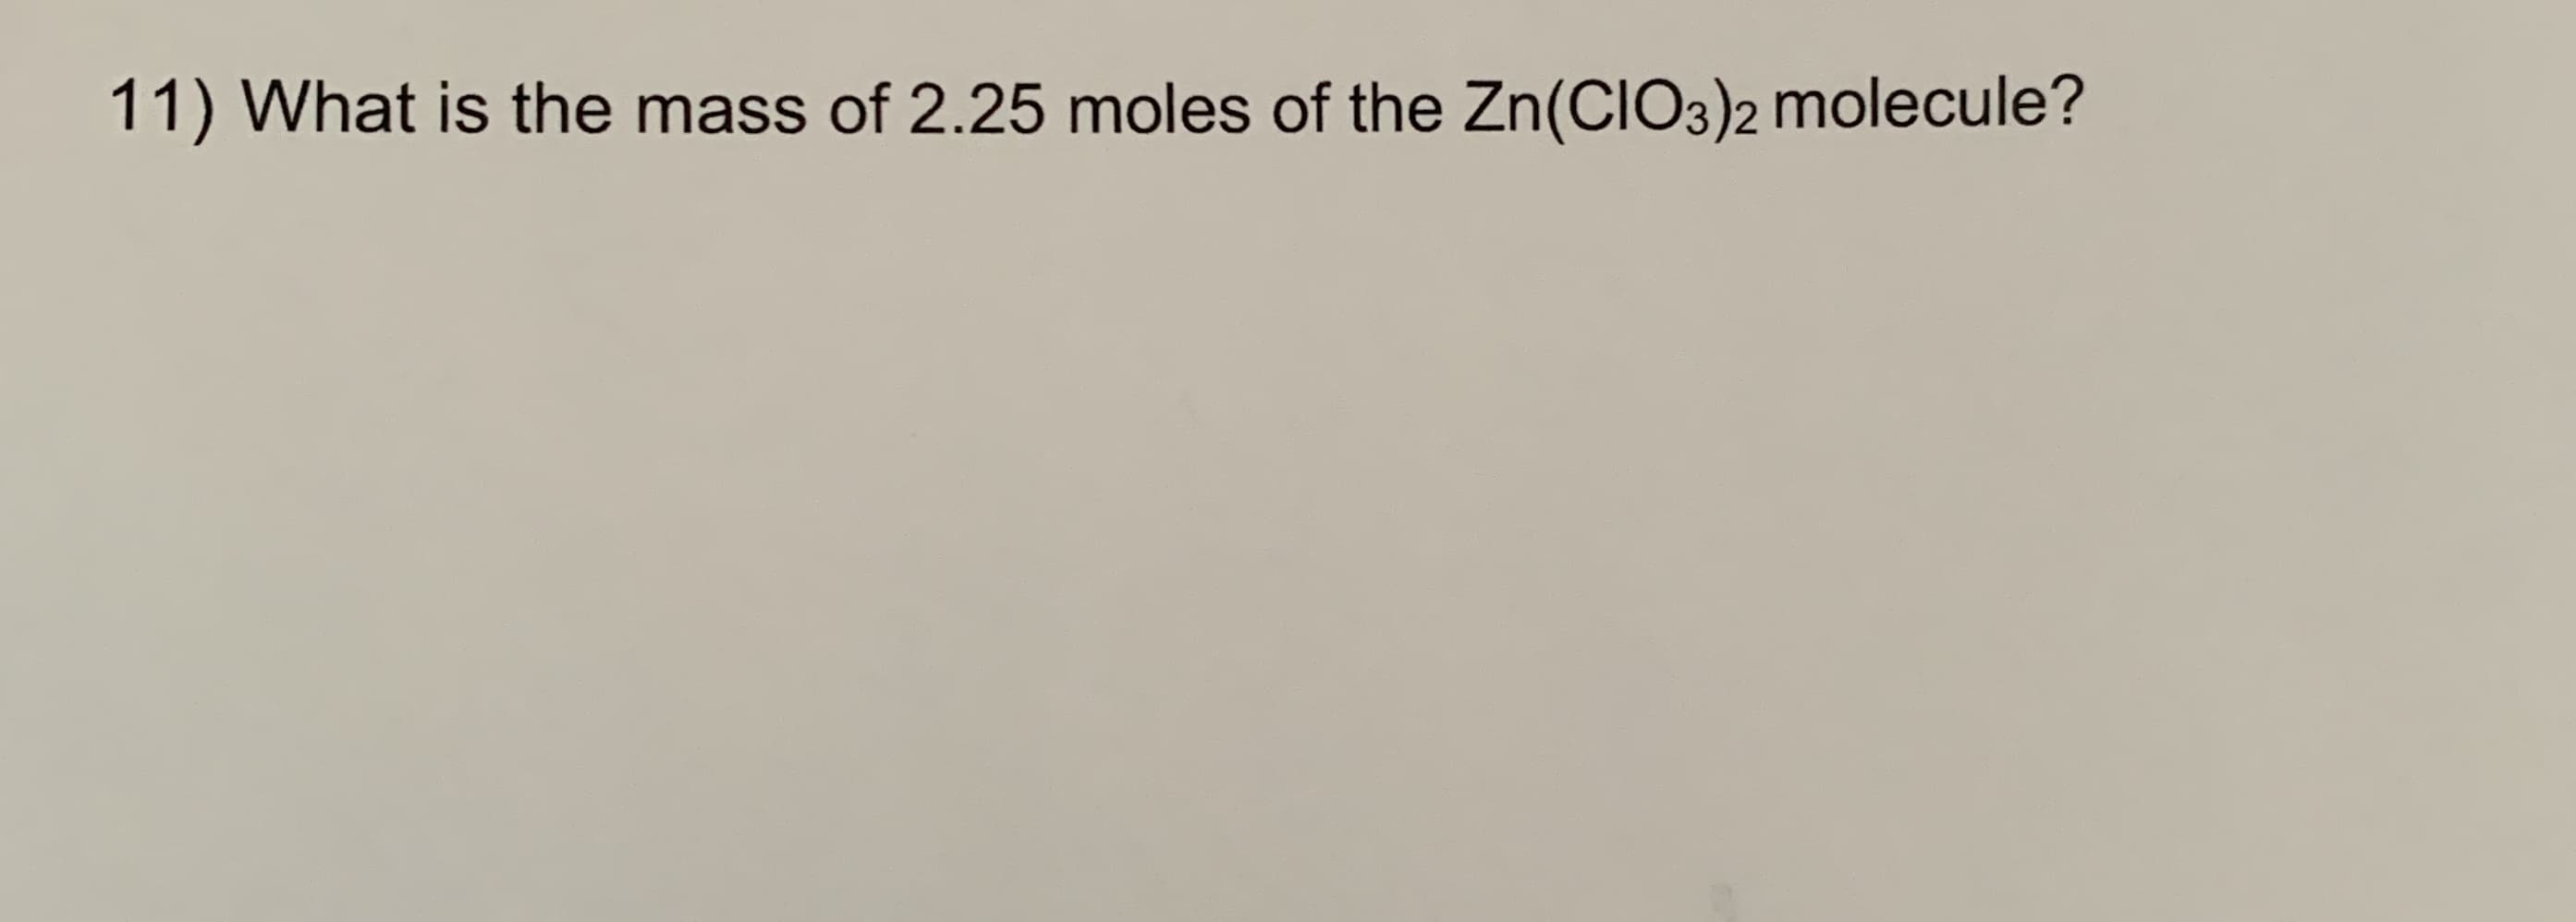 11) What is the mass of 2.25 moles of the Zn(CIO3)2 molecule?
